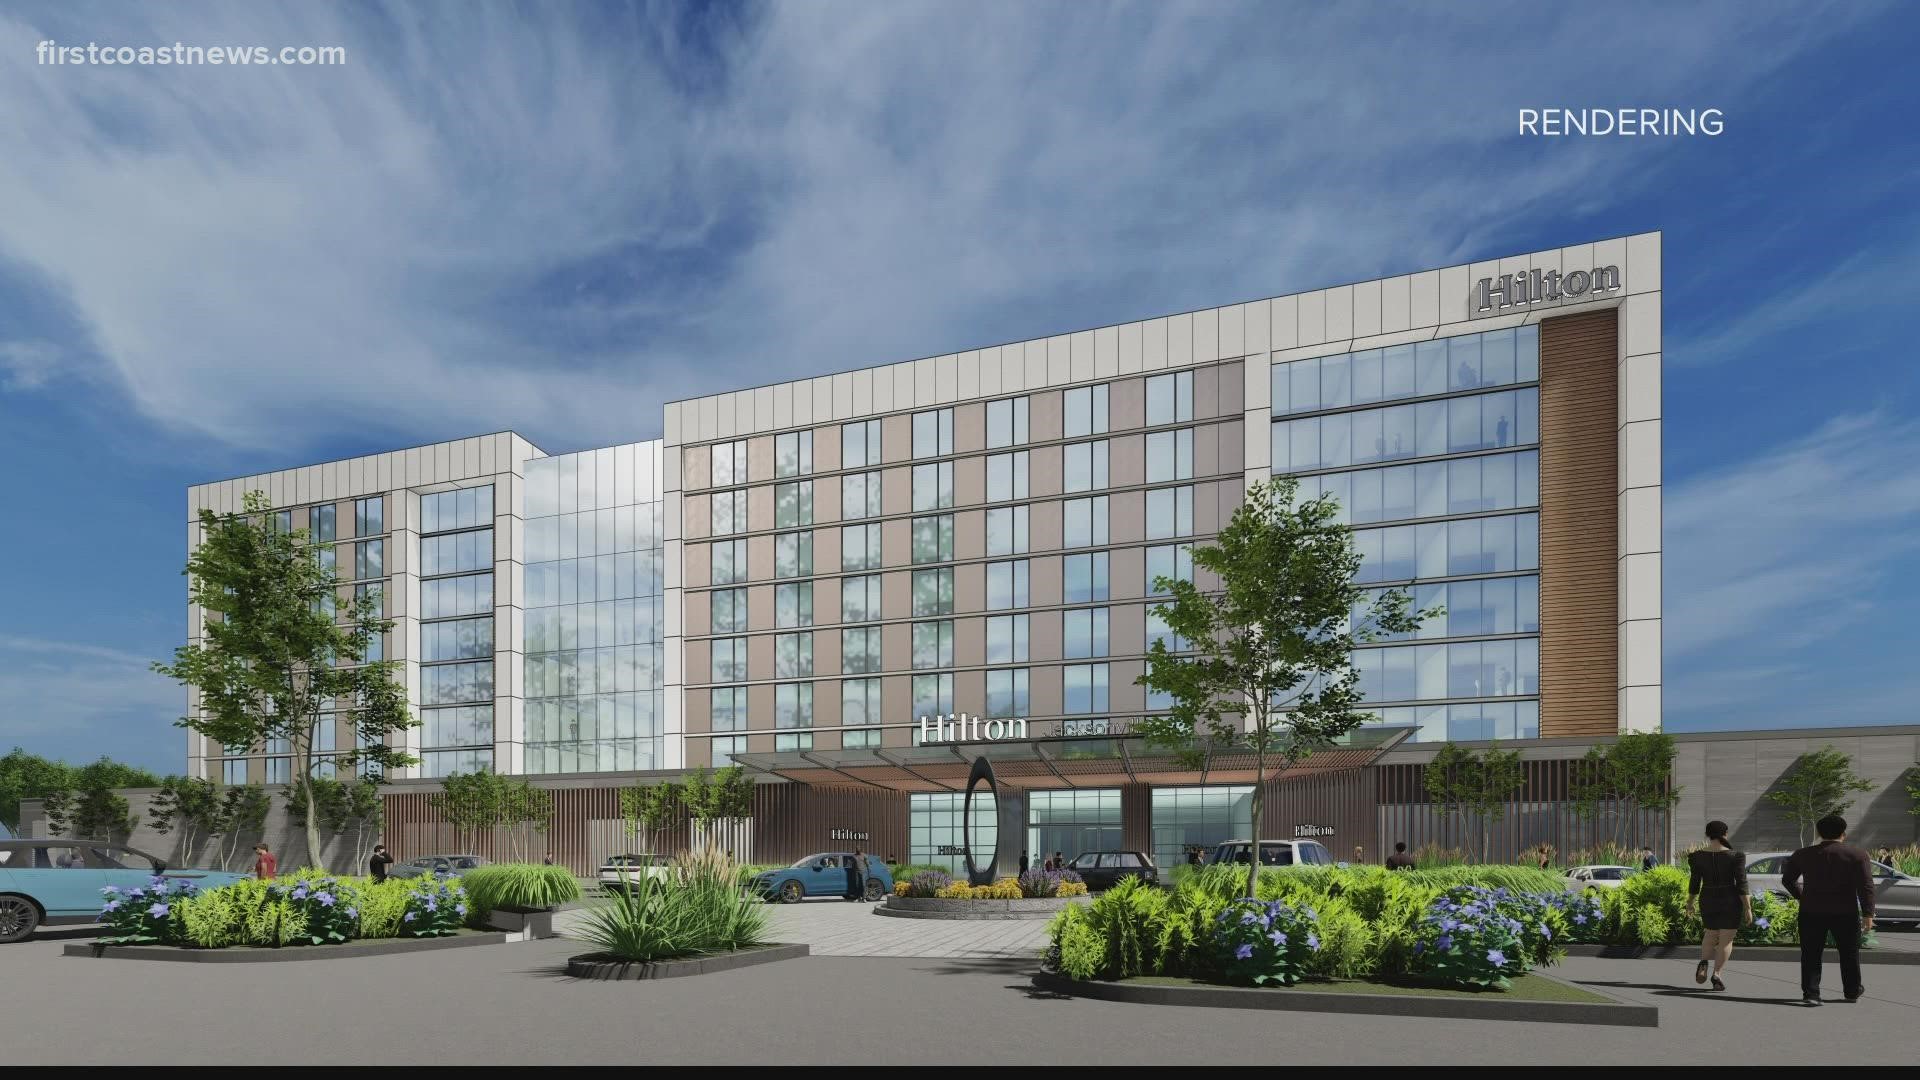 The Hilton Hotel will begin construction in the summer of 2022 with its estimated completion in 2024. The project is expected to cost $70 million.